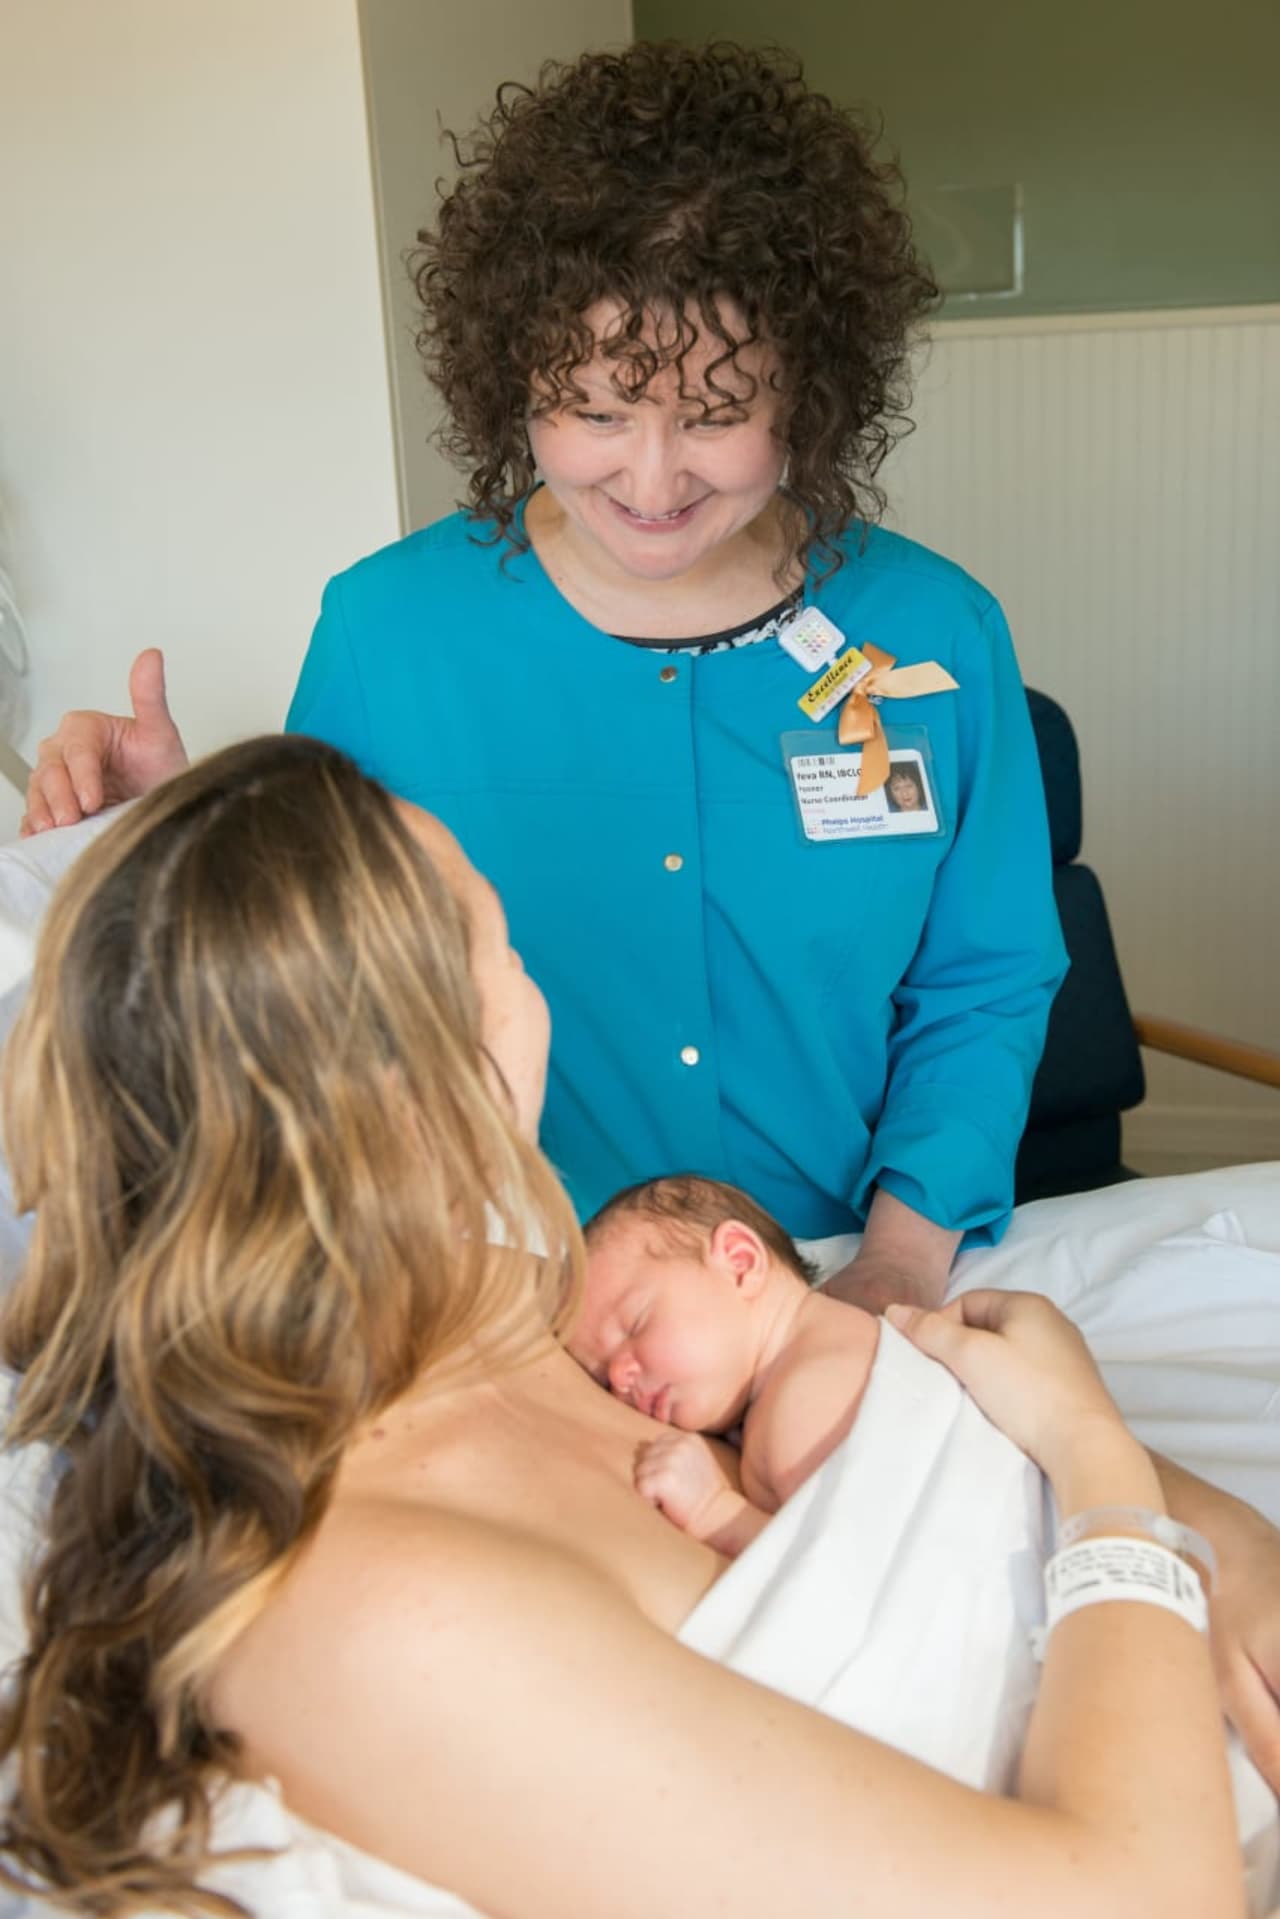 Phelps Hospital has been named one of top the top hospitals for infant and newborn care.